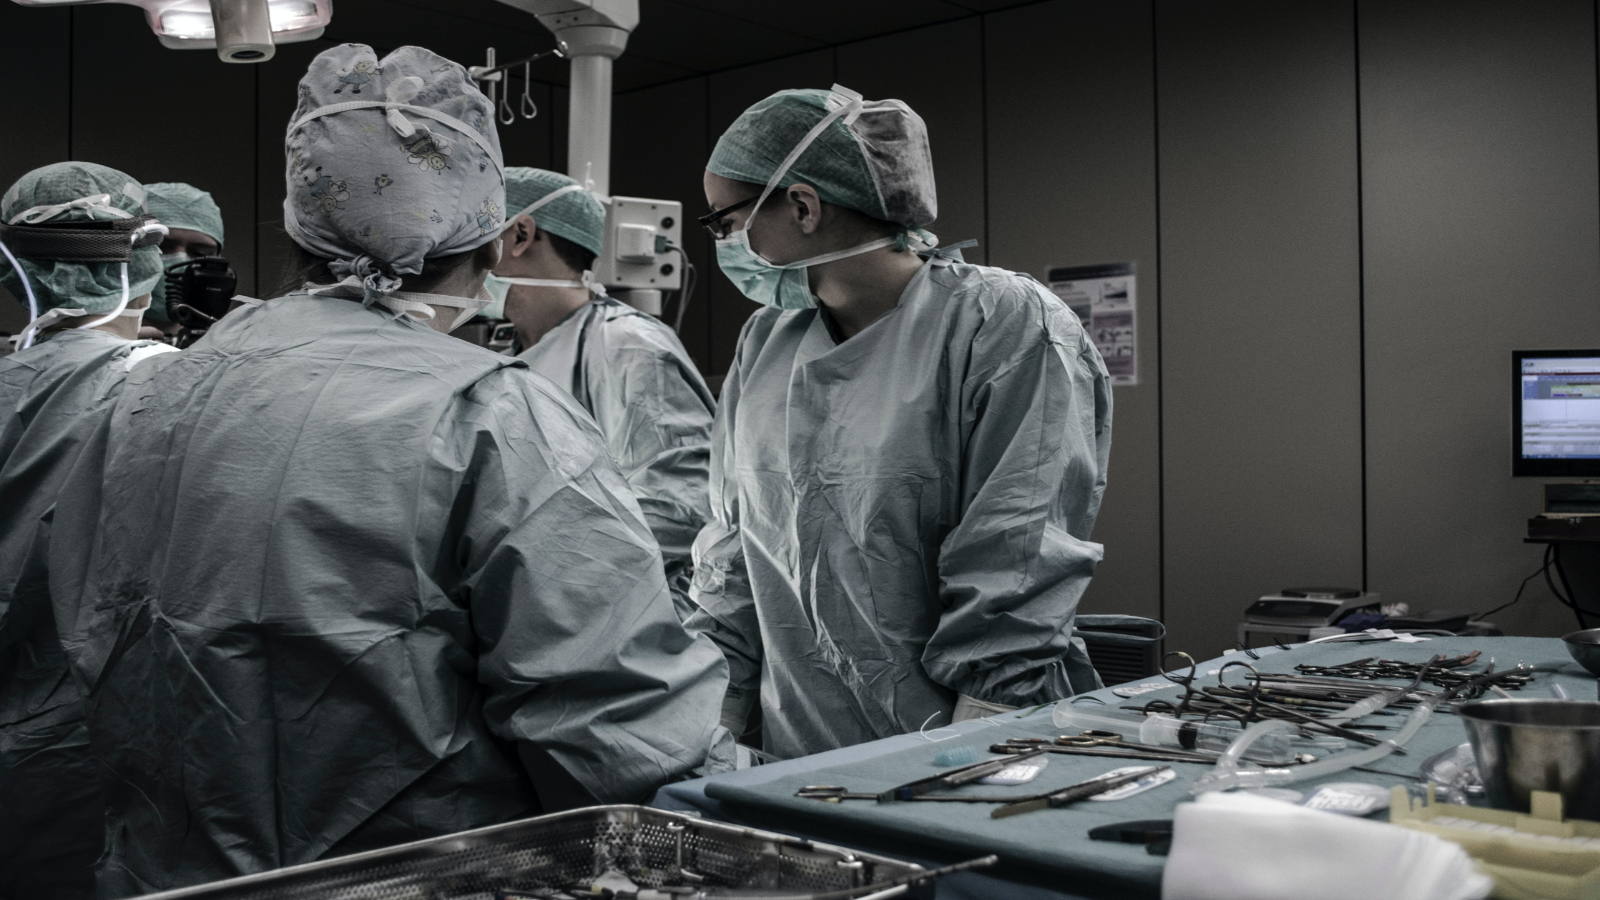 Surgeons preparing for surgery. Photo by Piron Guillaume on Unsplash